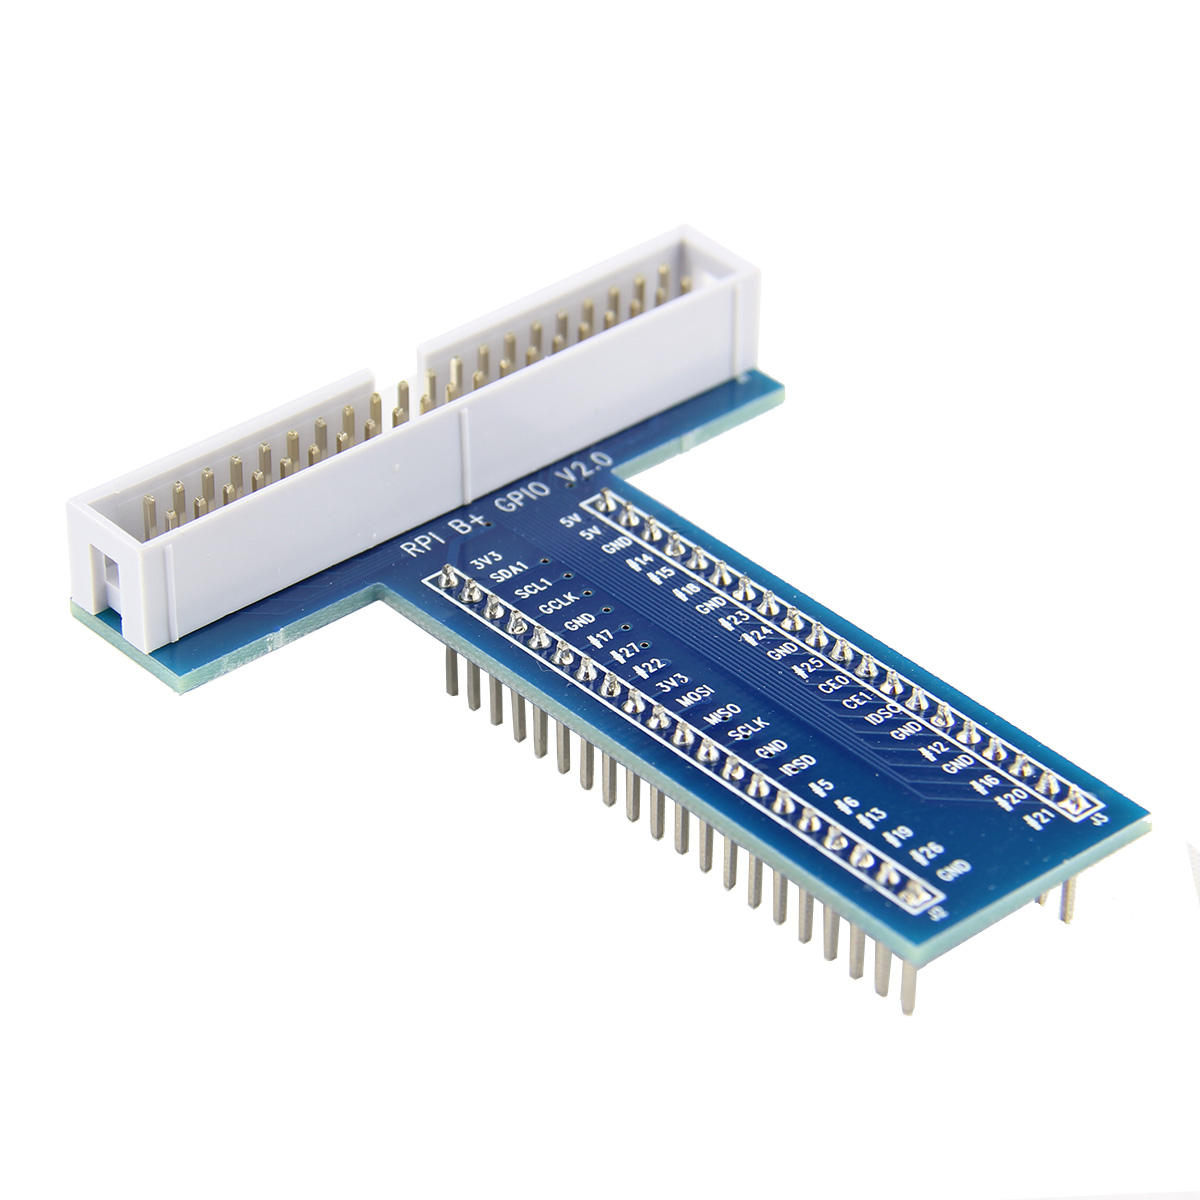 

40 Pin T Type GPIO Adapter Expansion Bread Board For Raspberry Pi 2 Model B / B+